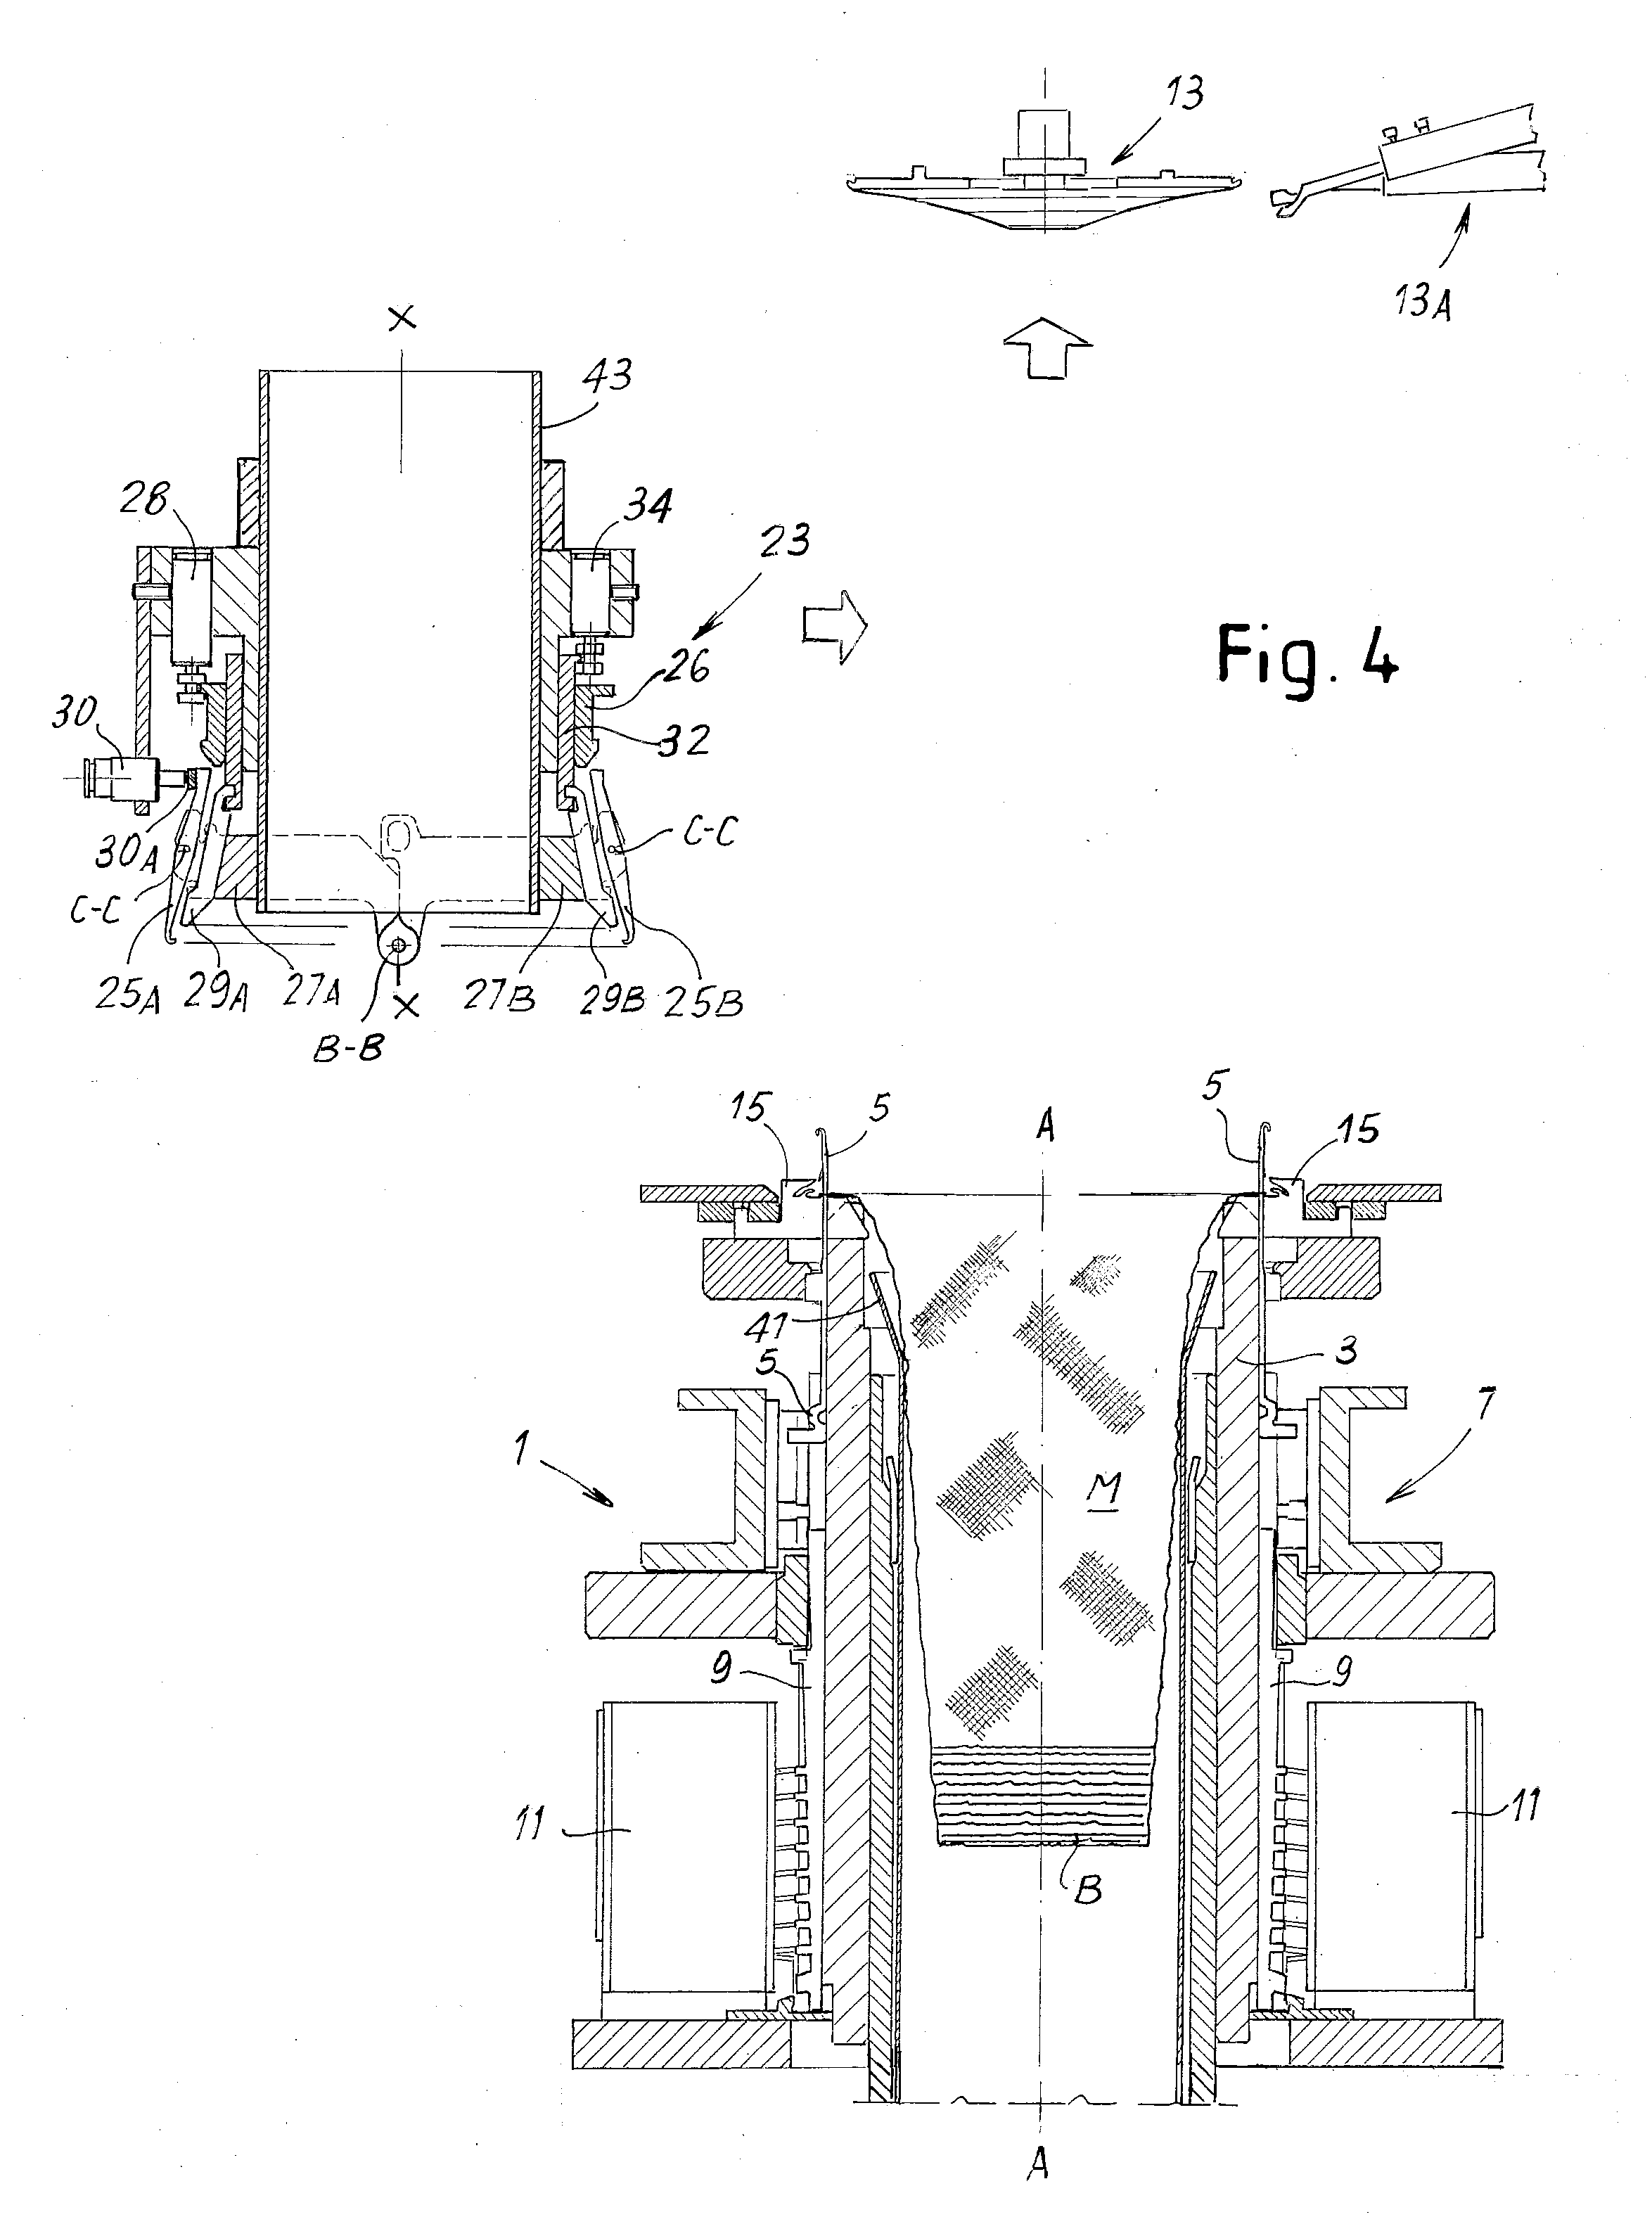 Method and machine for knitting tubular knitted articles